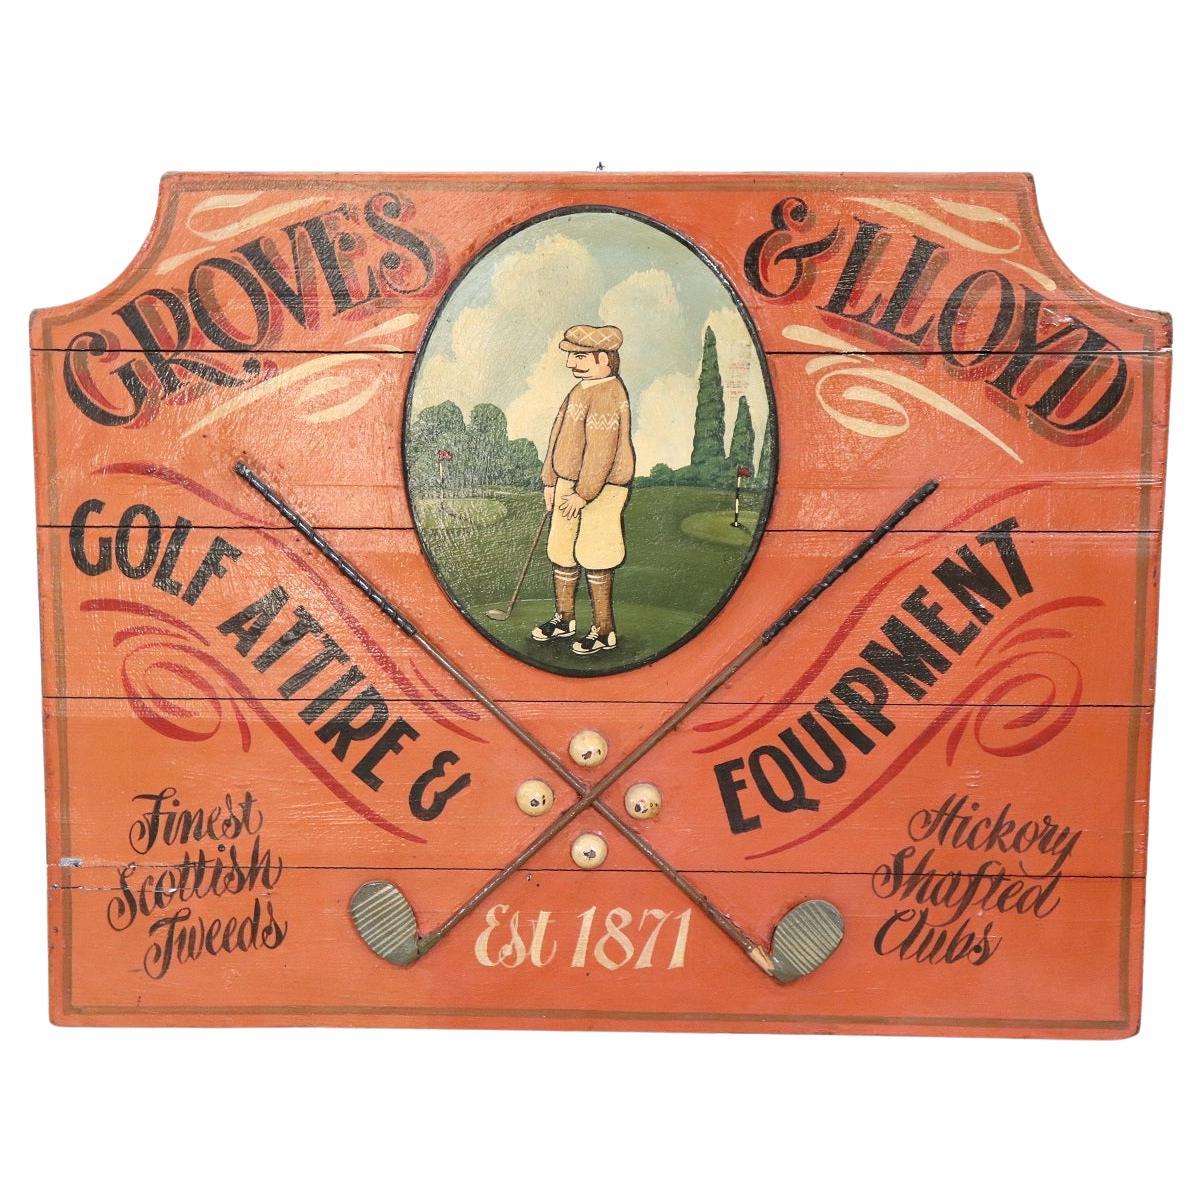 Vintage Hand Painted on Wood Advertising Sign for Golf Equipments, 1920s